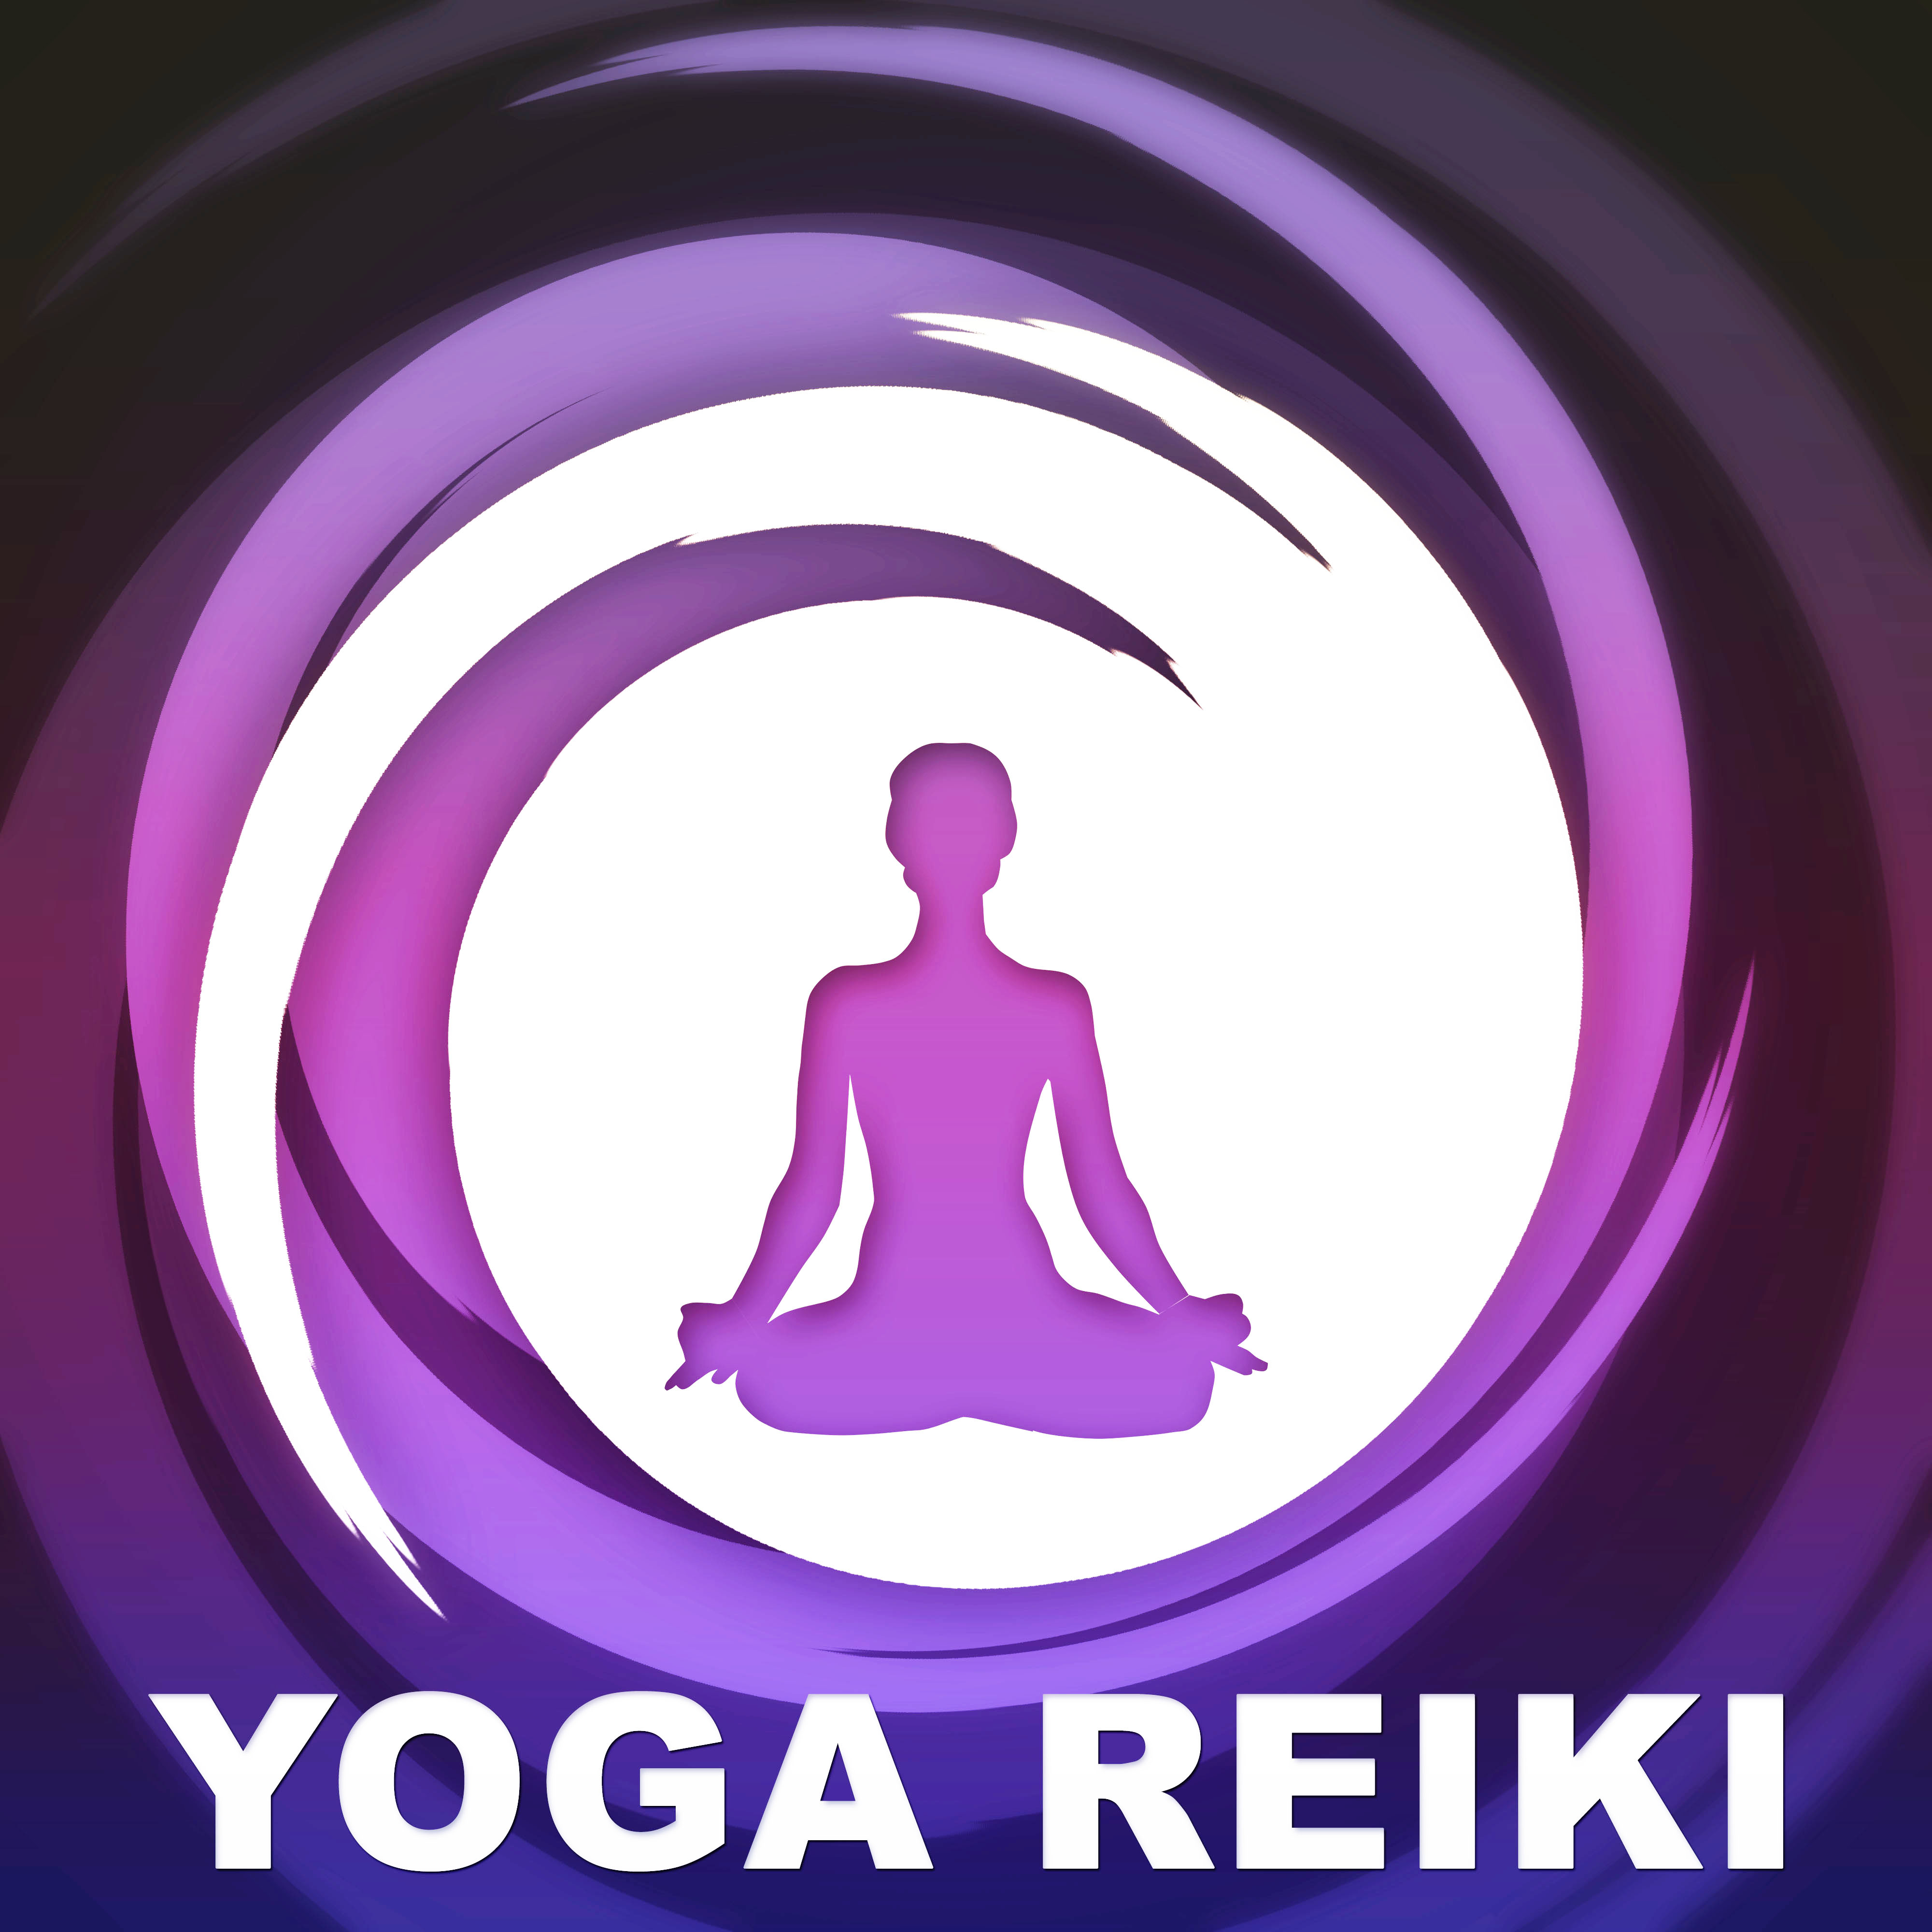 Yoga Reiki  Most Gentle Sounds for Practise Yoga Meditation, Relax and Rest,  Pure Mind and Enjoy Yourself